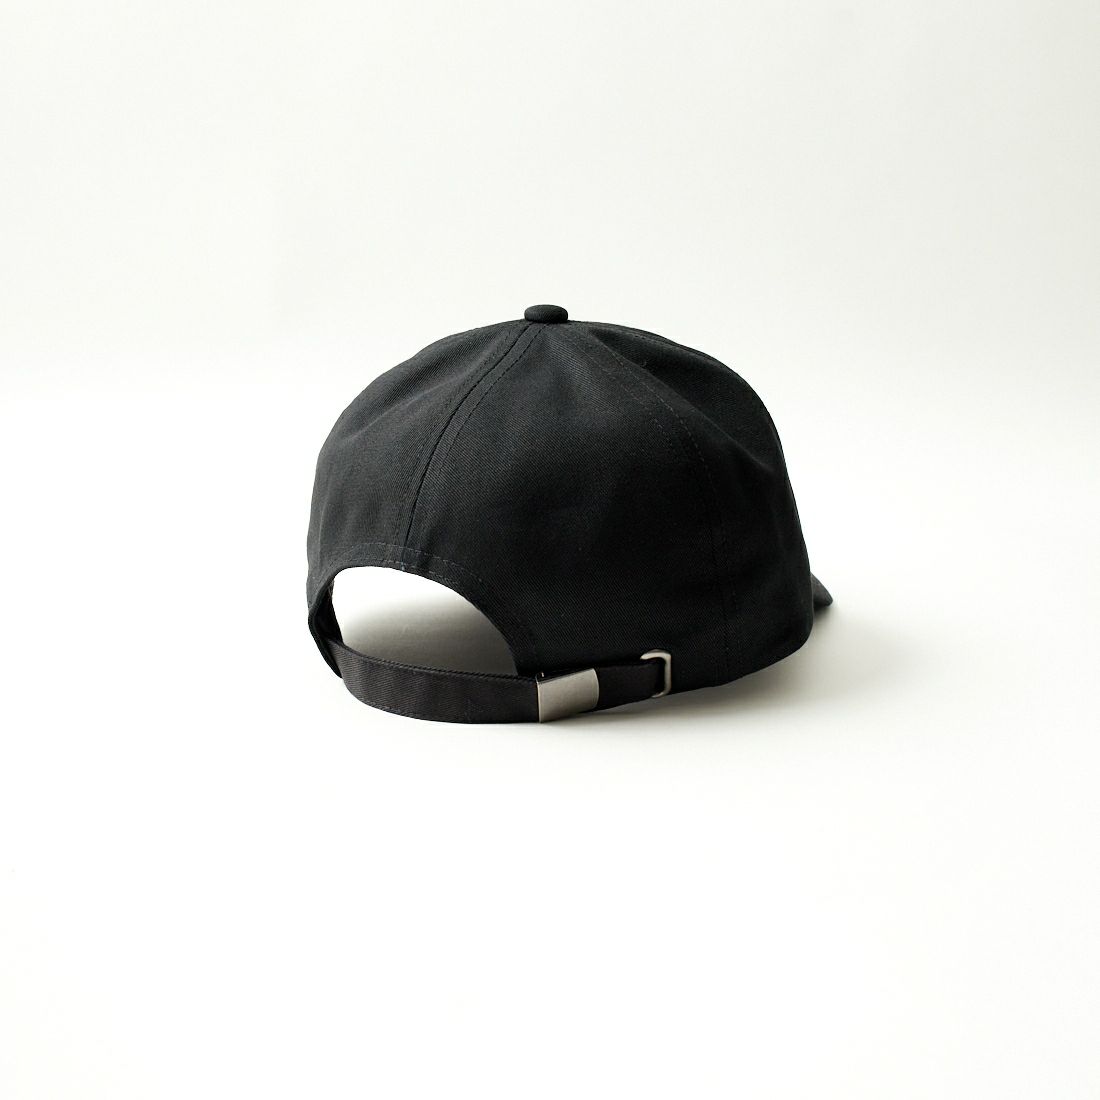 RVCA [ルーカ] VICES スナップバックキャップ [BE041-923] BLK